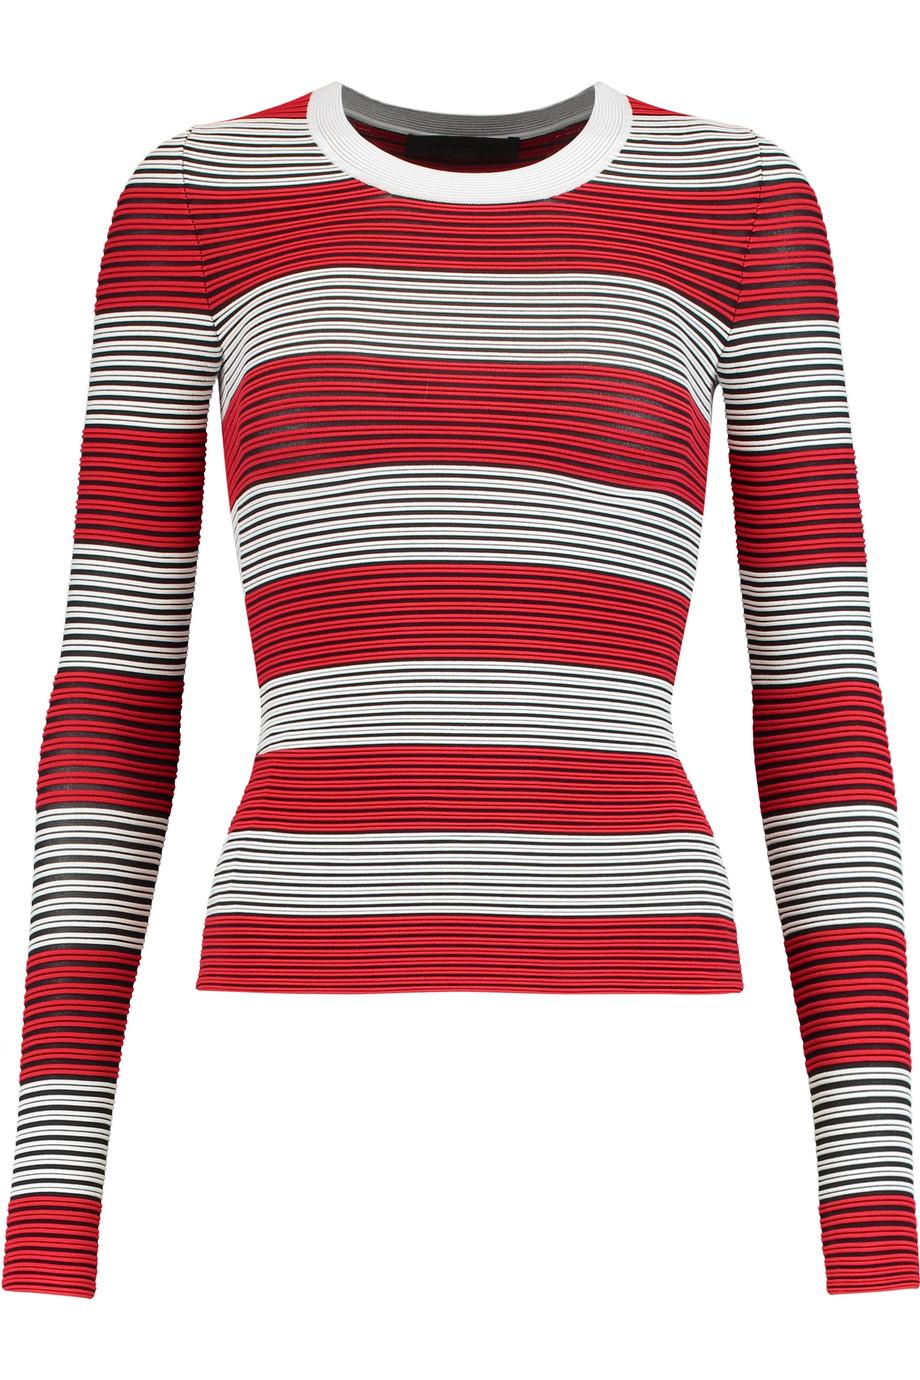 Alexander Wang Striped Ribbed Stretch-knit Top | ModeSens